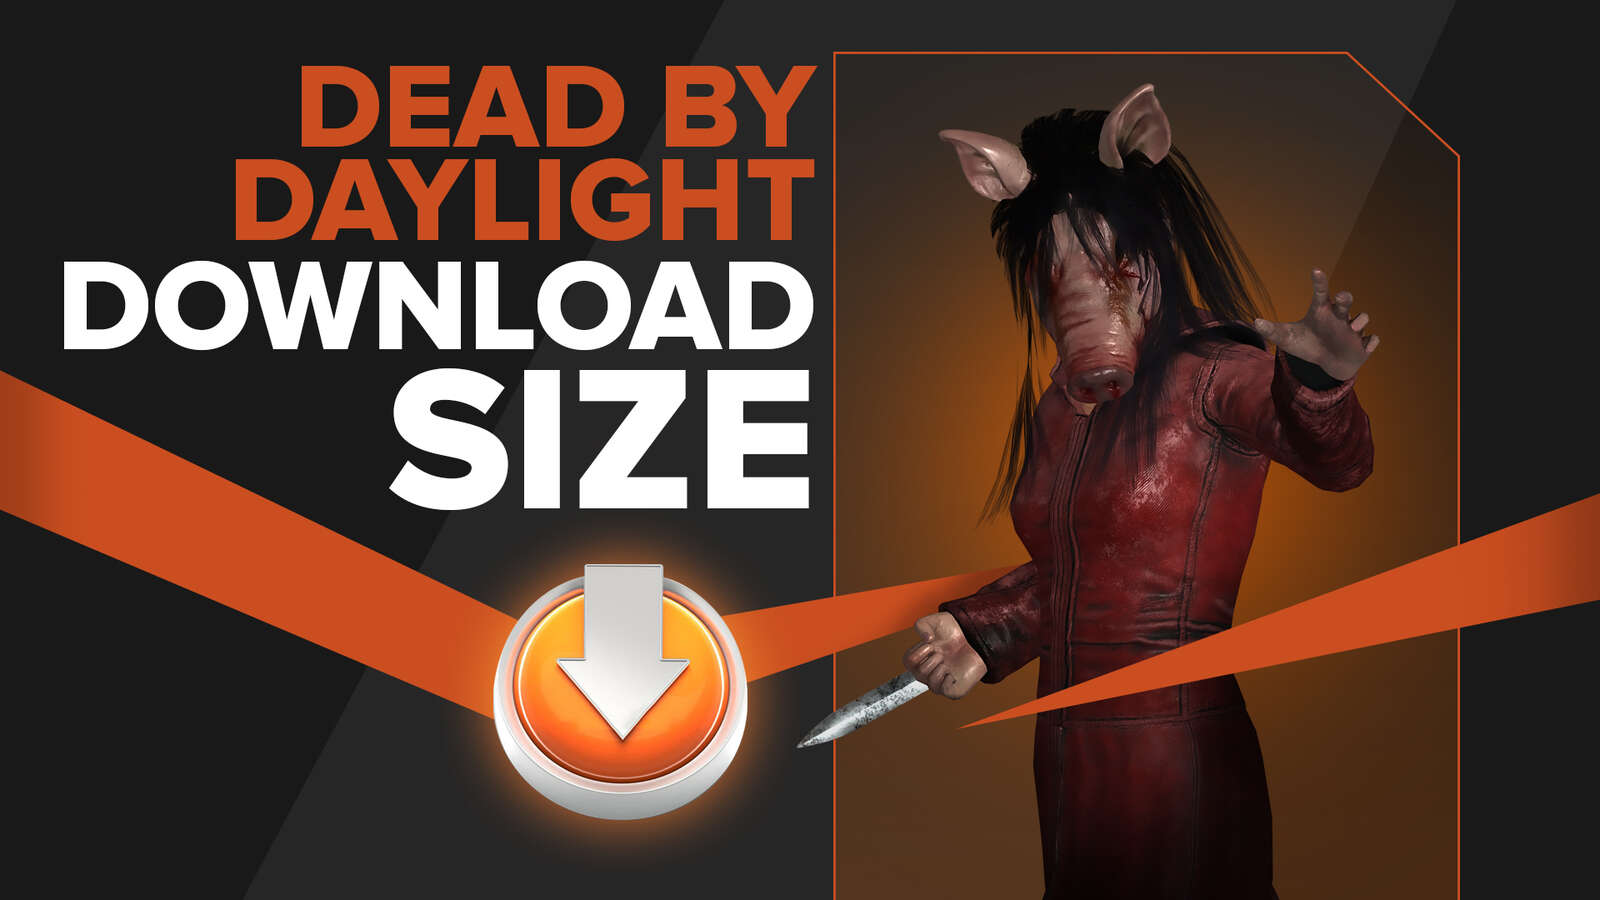 Dead By Daylight File Size For All Platforms [Up-to-date Version]